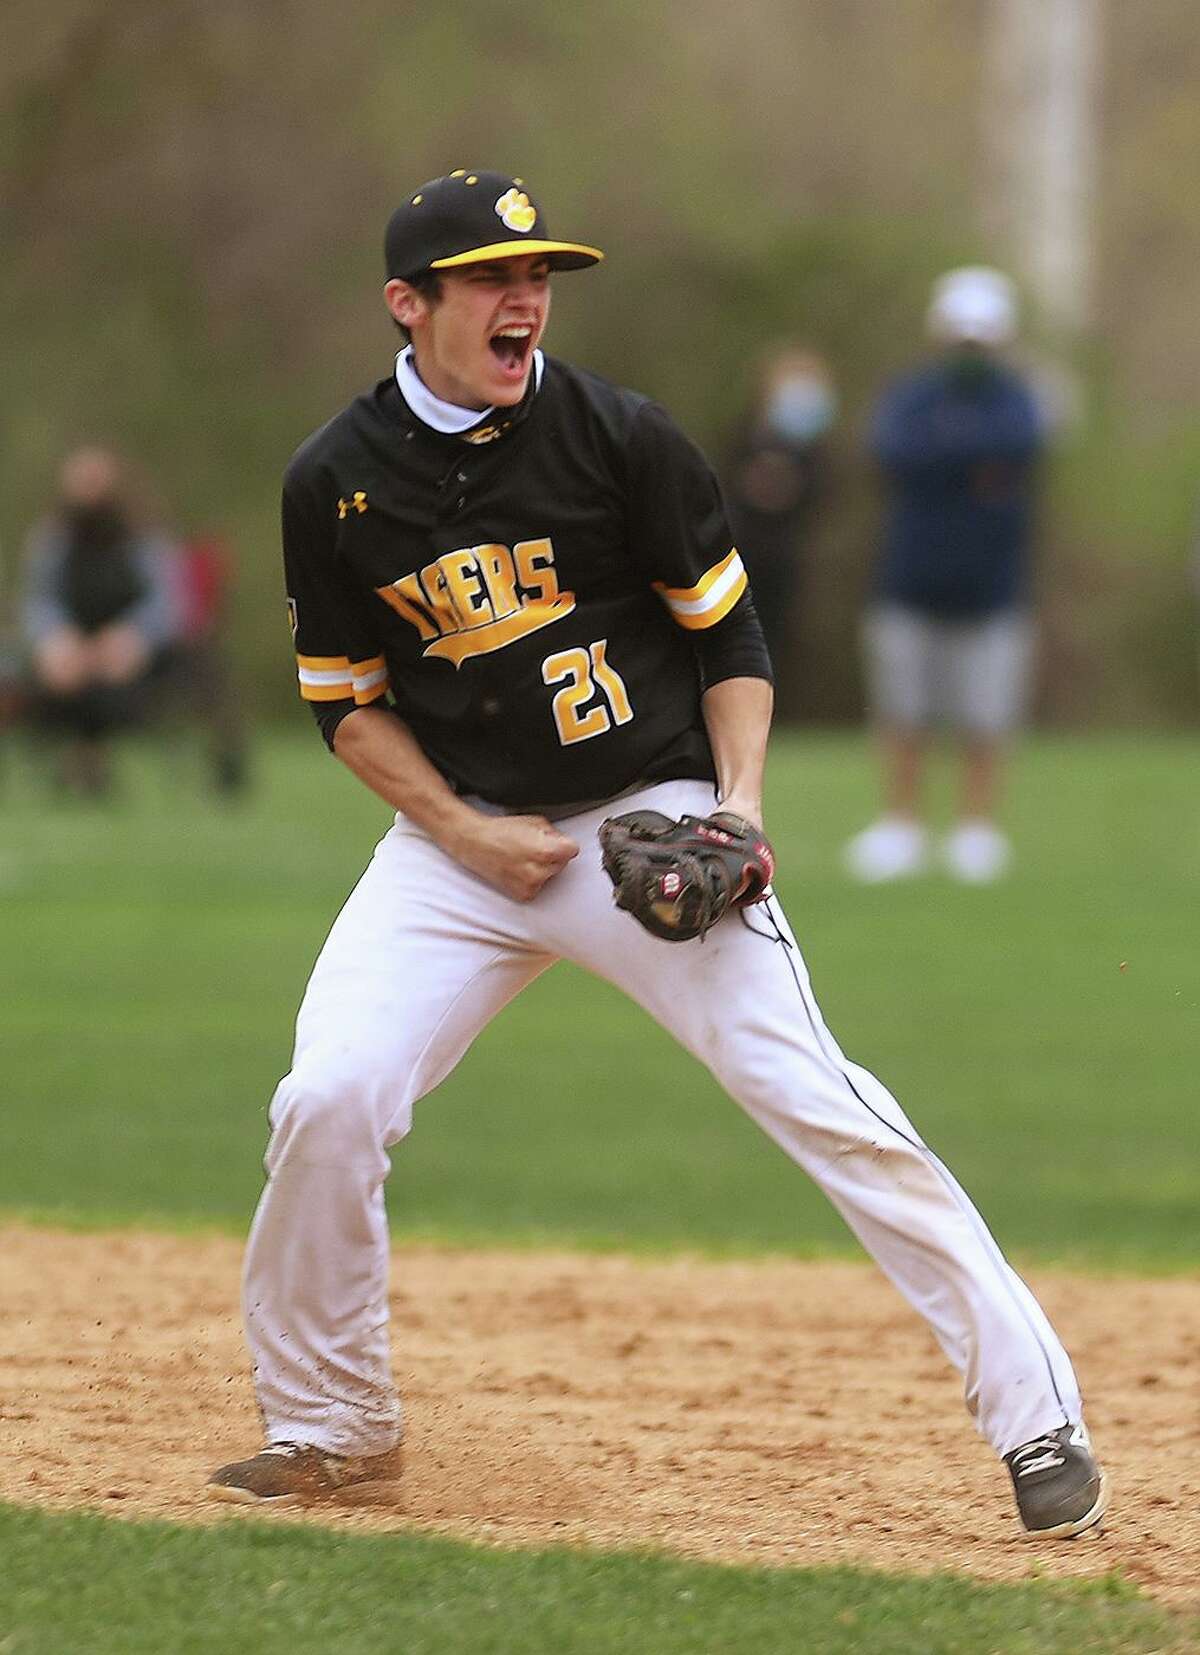 Hand shortstop Jack Pireaux reacts during Monday’s game against Amity in Woodbridge.